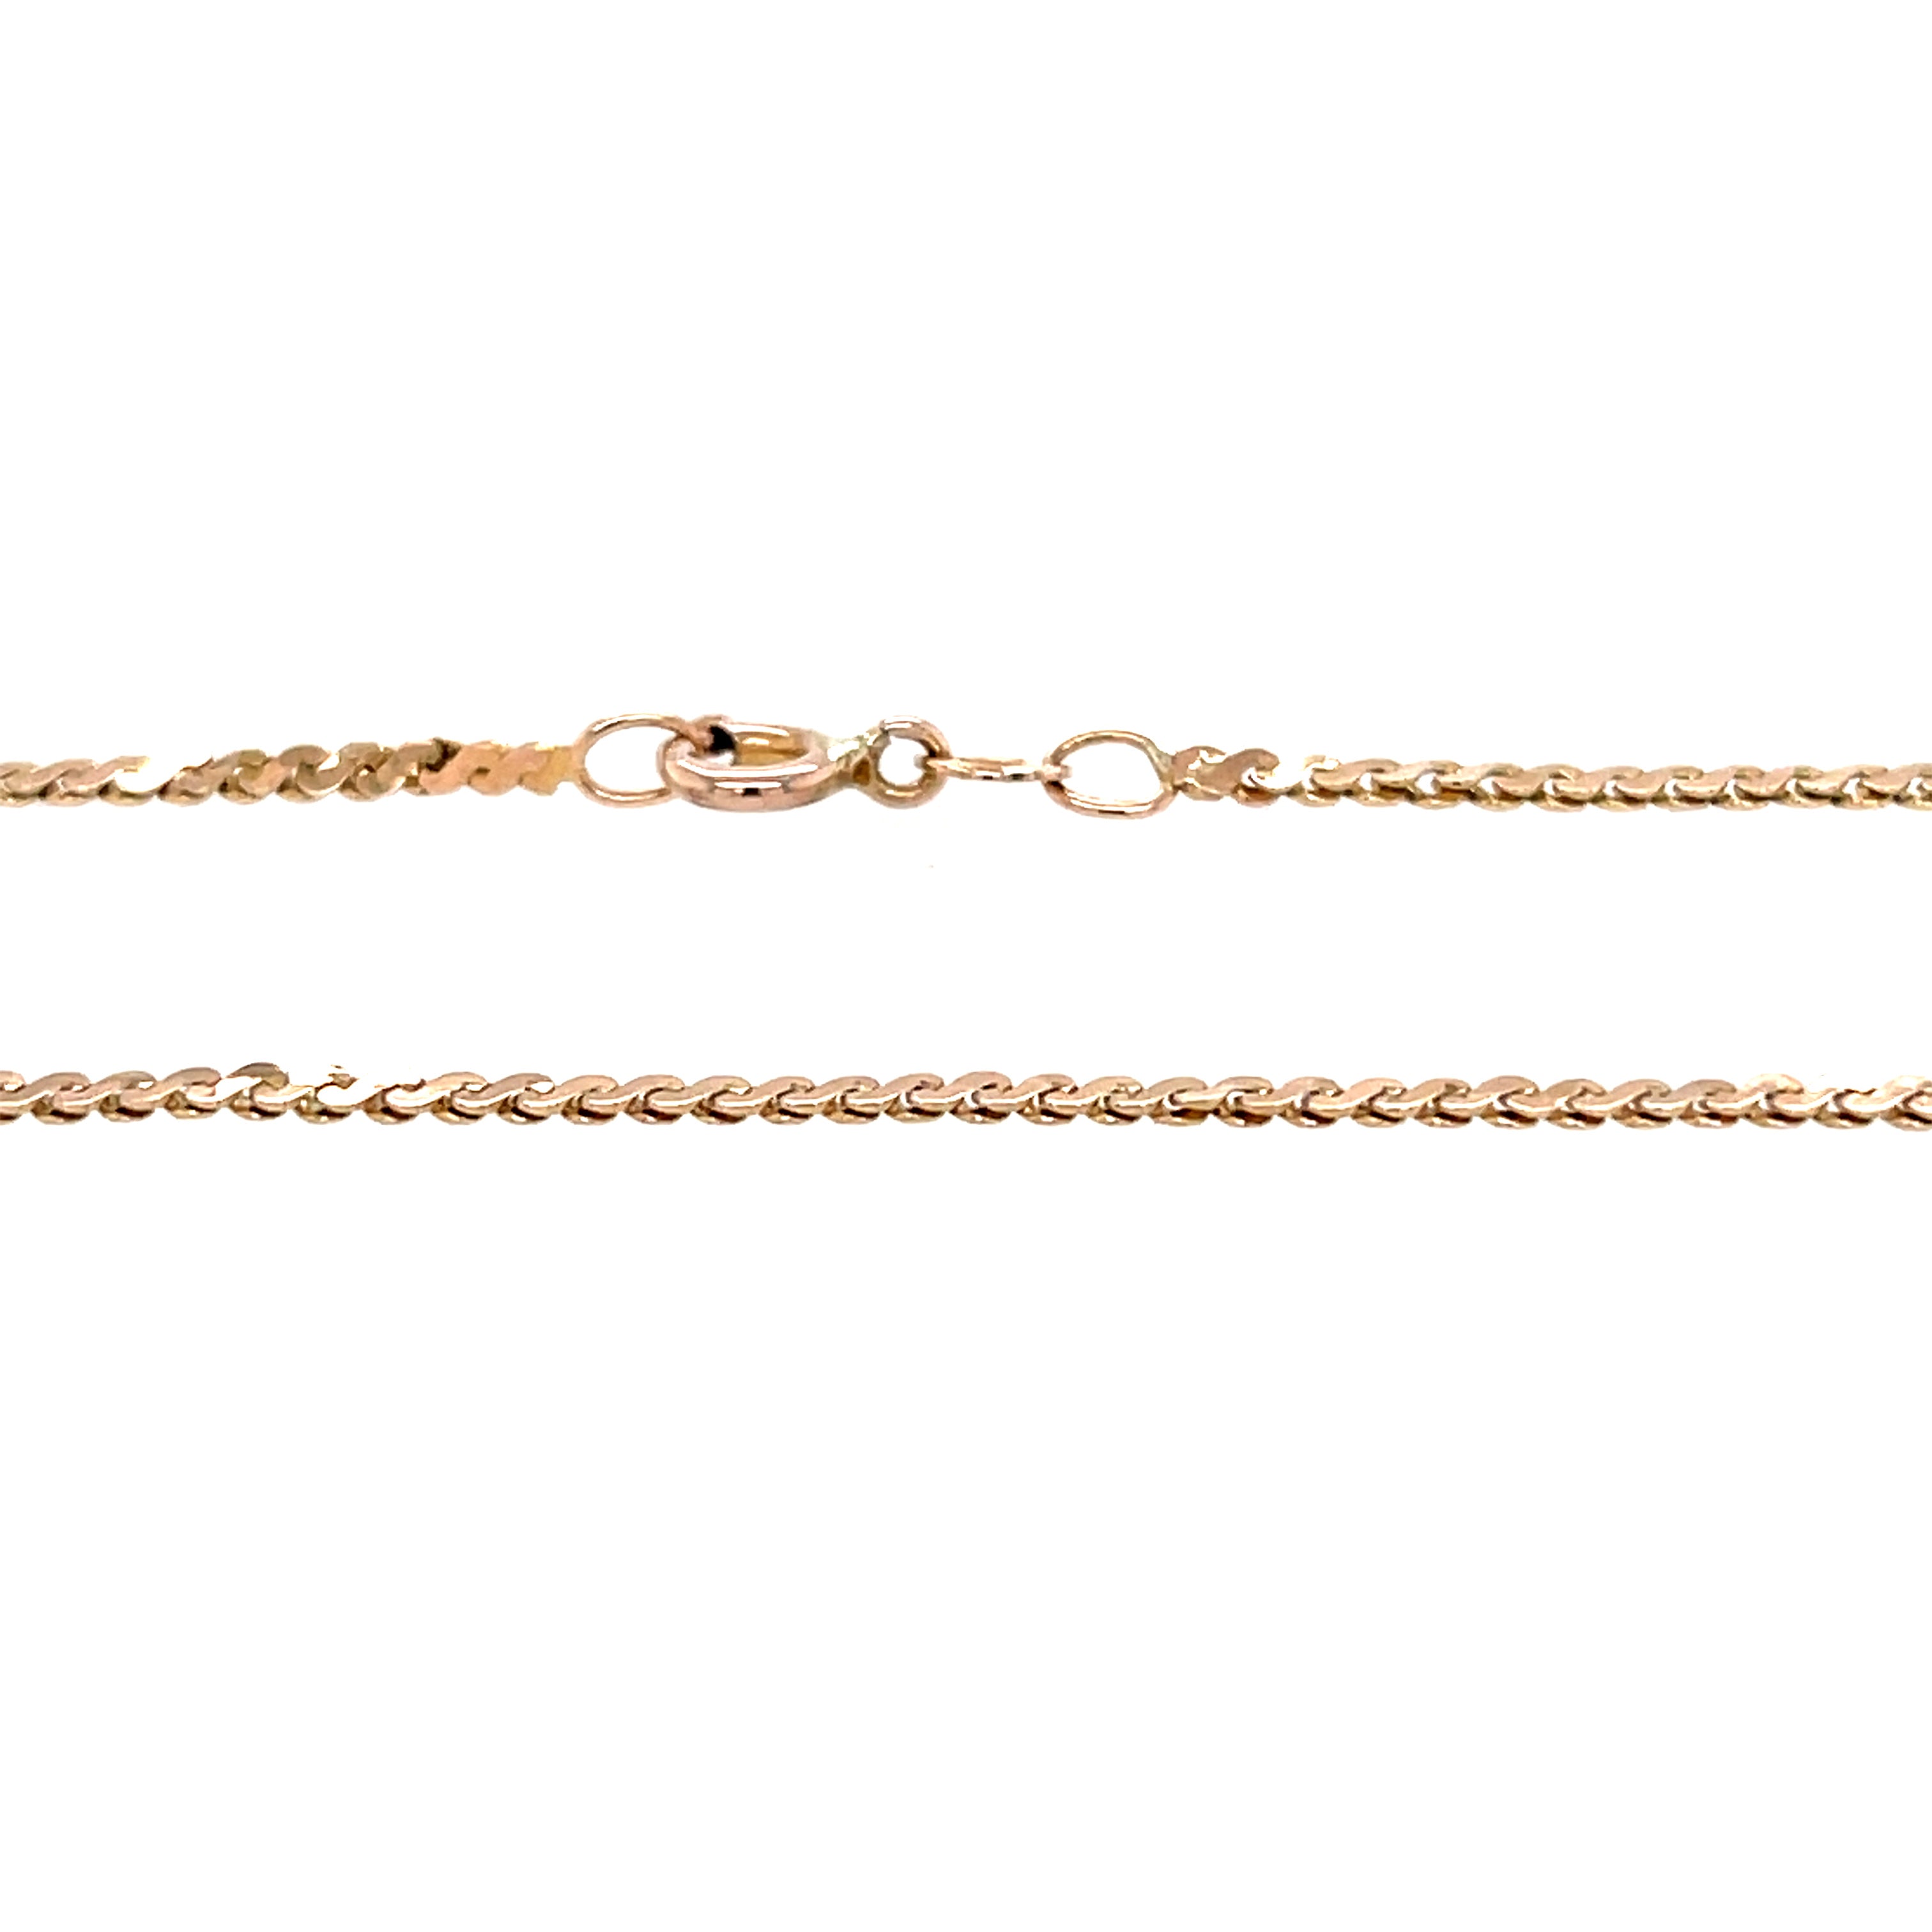 9ct Yellow Gold 22" S Link Chain - 3.63g SOLD